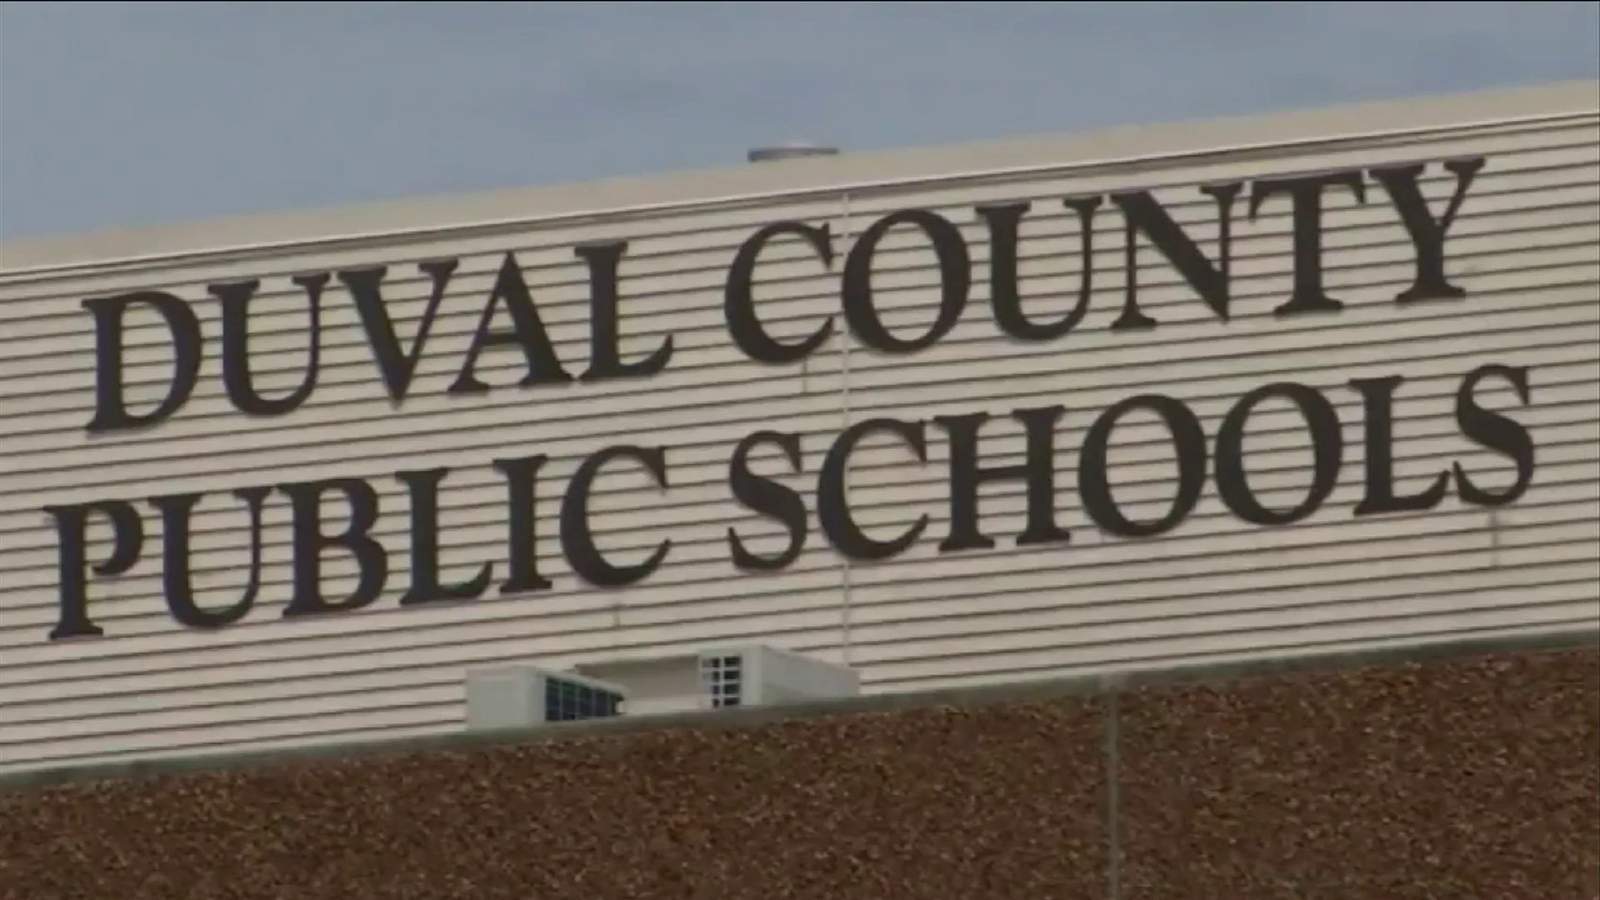 Duval school district has spent more than $10 million in response to COVID-19